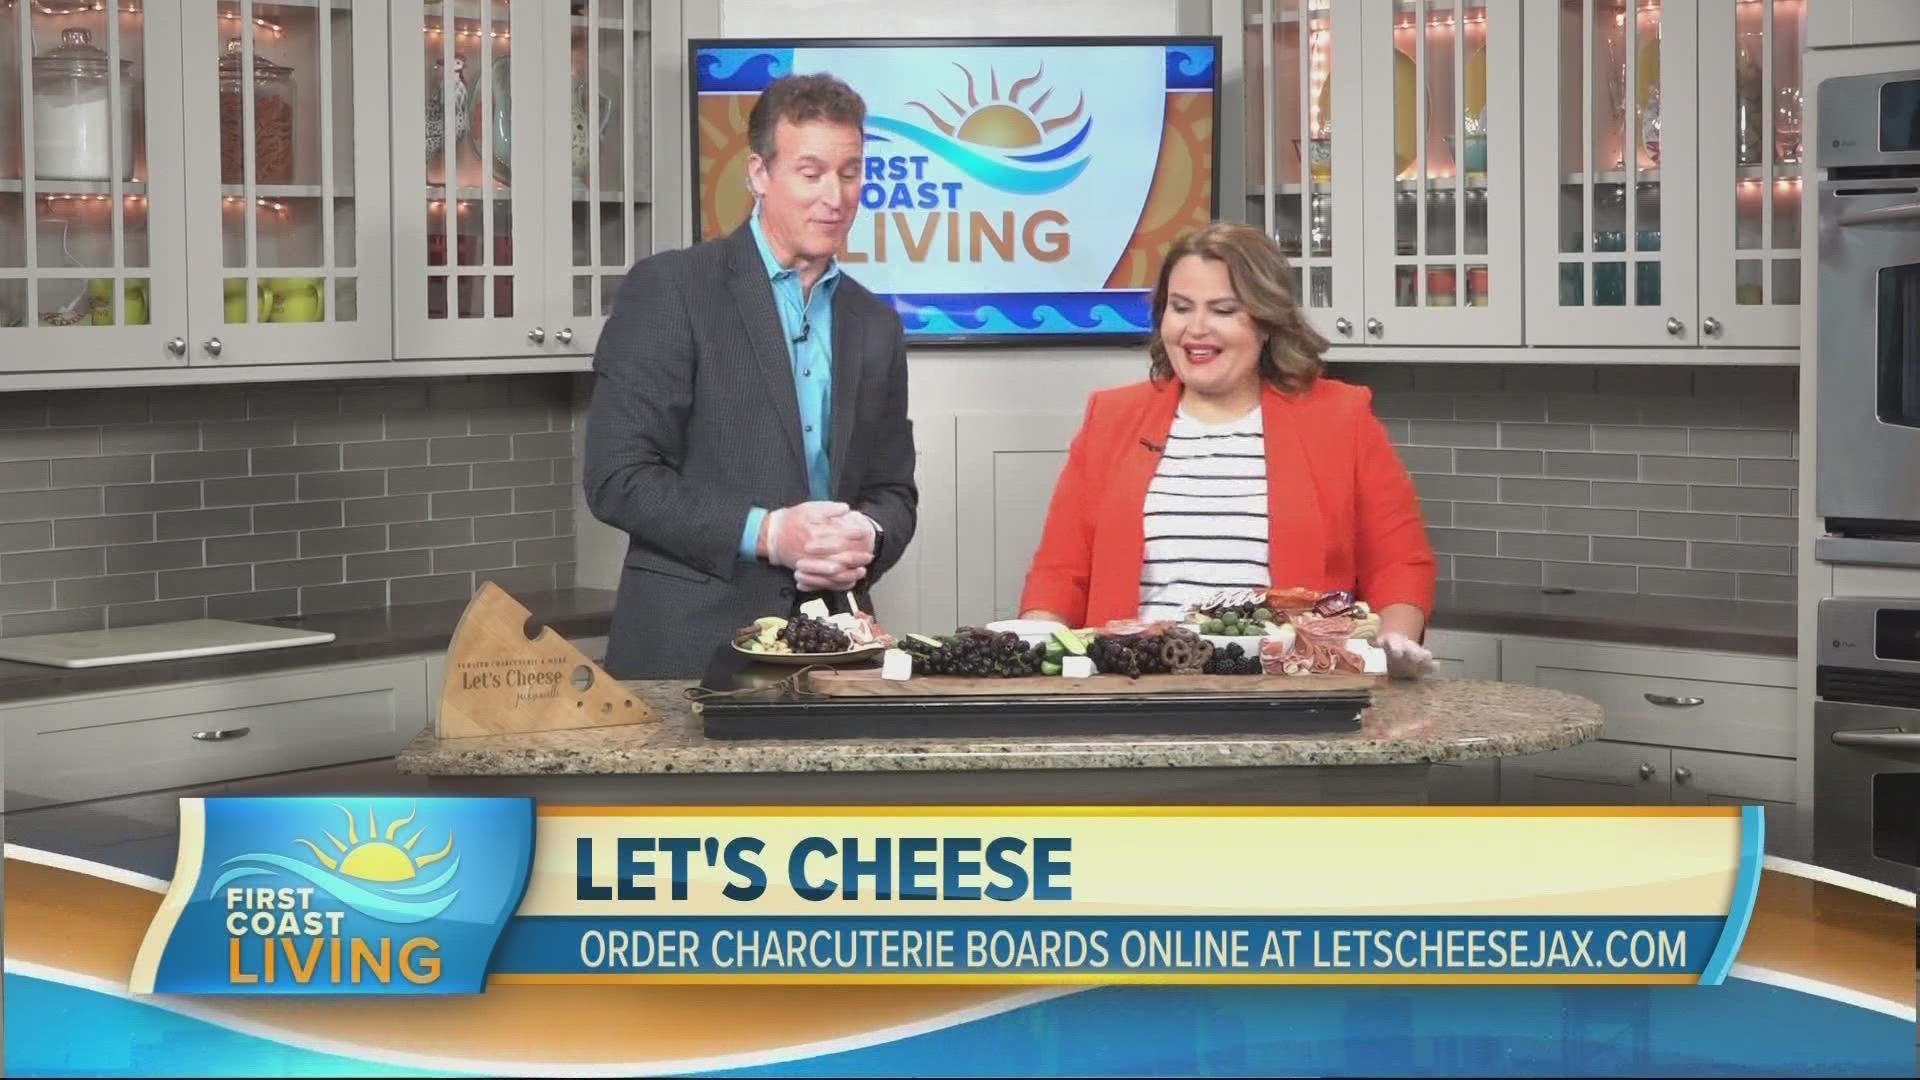 Rebecca Sobrado, Owner and Curator of "Let's Cheese" shares how to wow your guests with a charcuterie board.